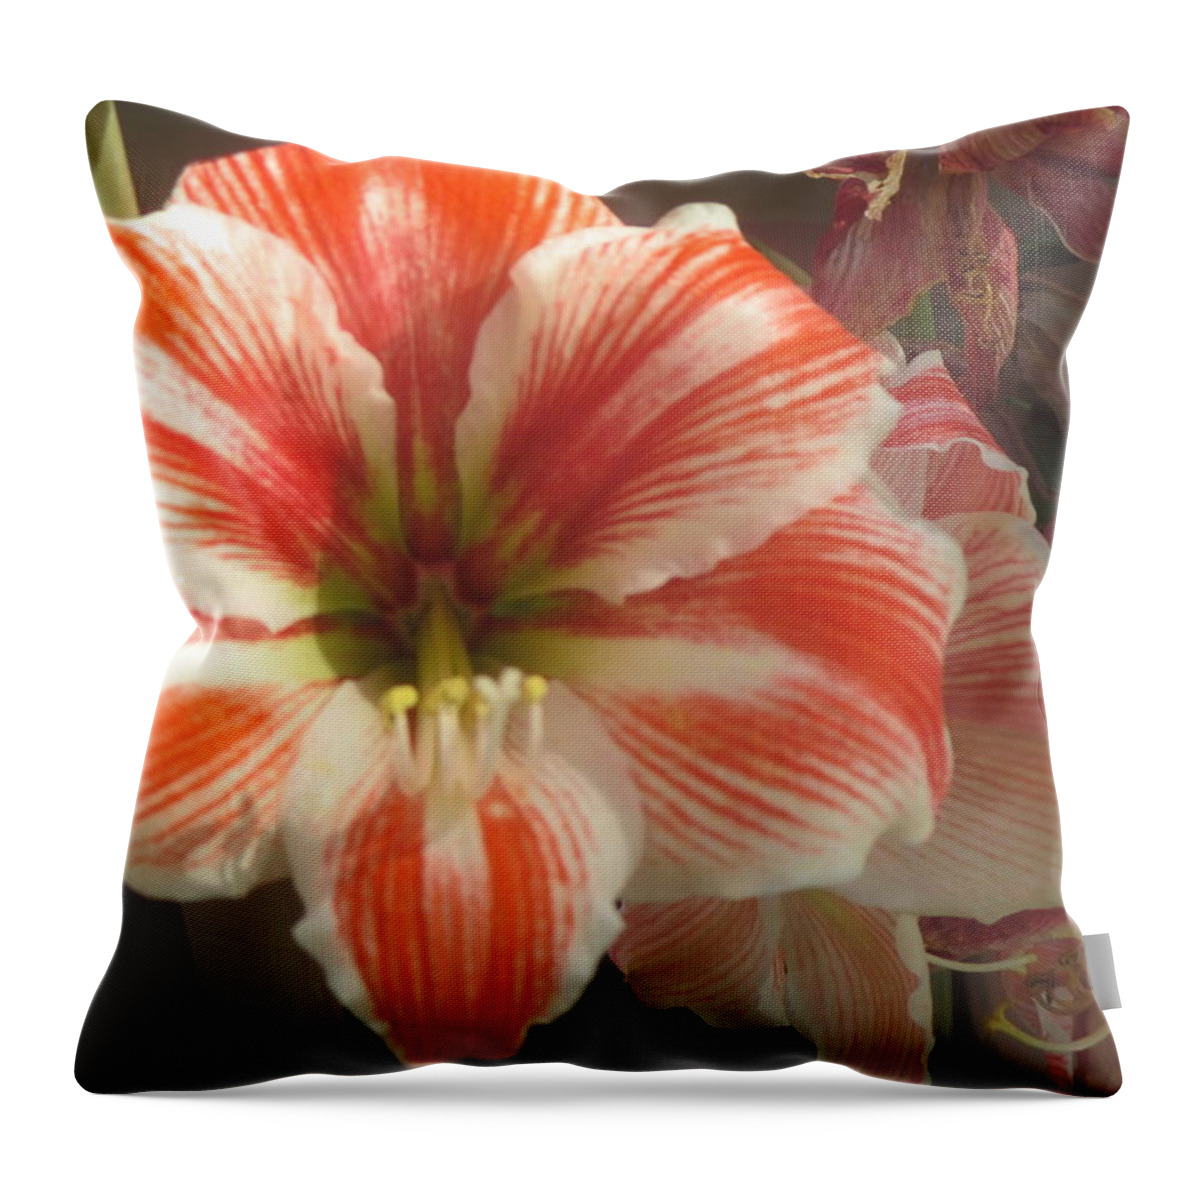 Flower Throw Pillow featuring the photograph Red And White Flower by Anamarija Marinovic